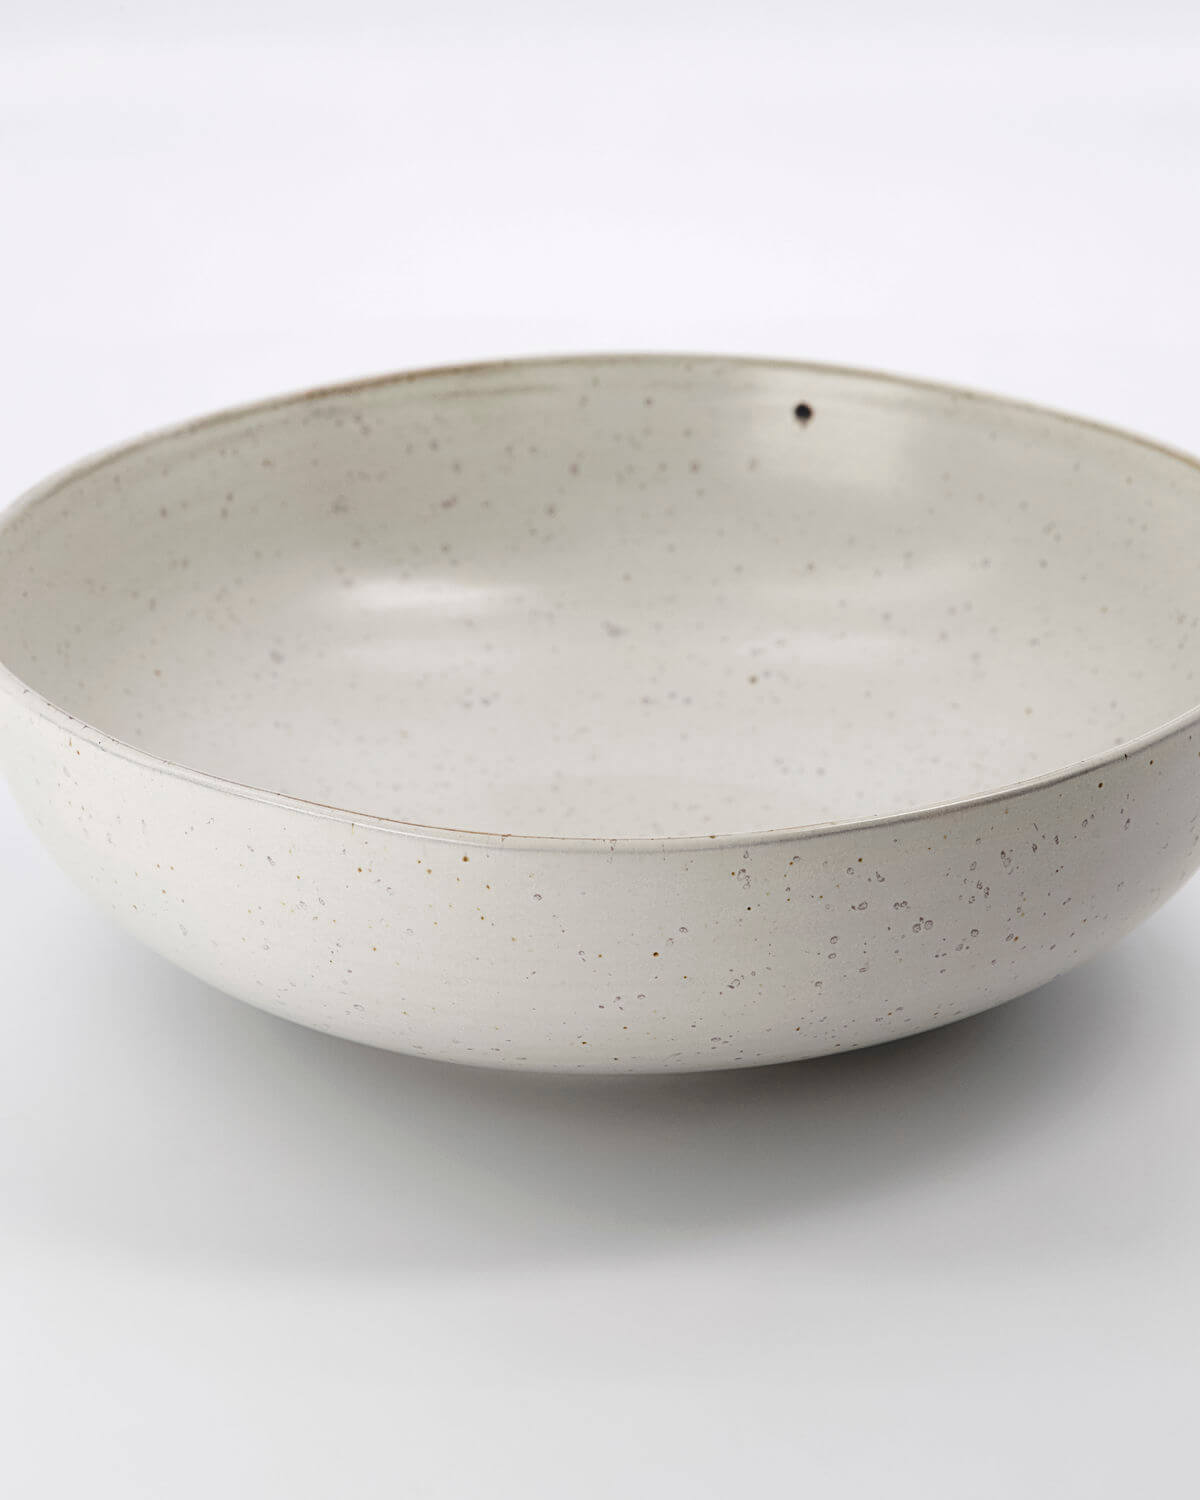 Serving Bowl | 22cm | Pion | Grey Speckled Glaze | by House Doctor - Lifestory - House Doctor